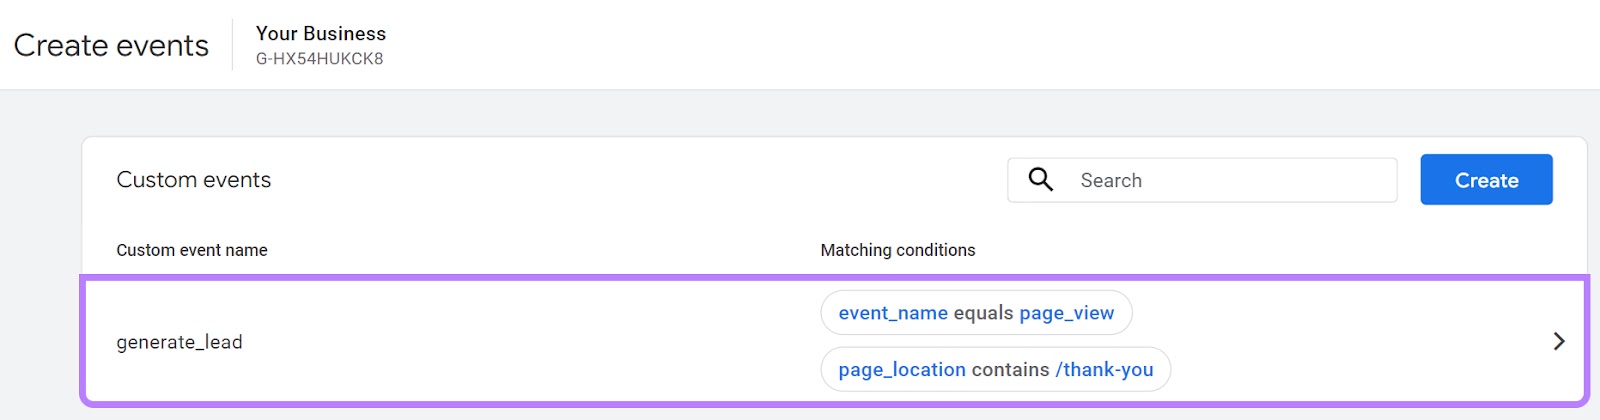 "generate_lead" new custom event in a summary list